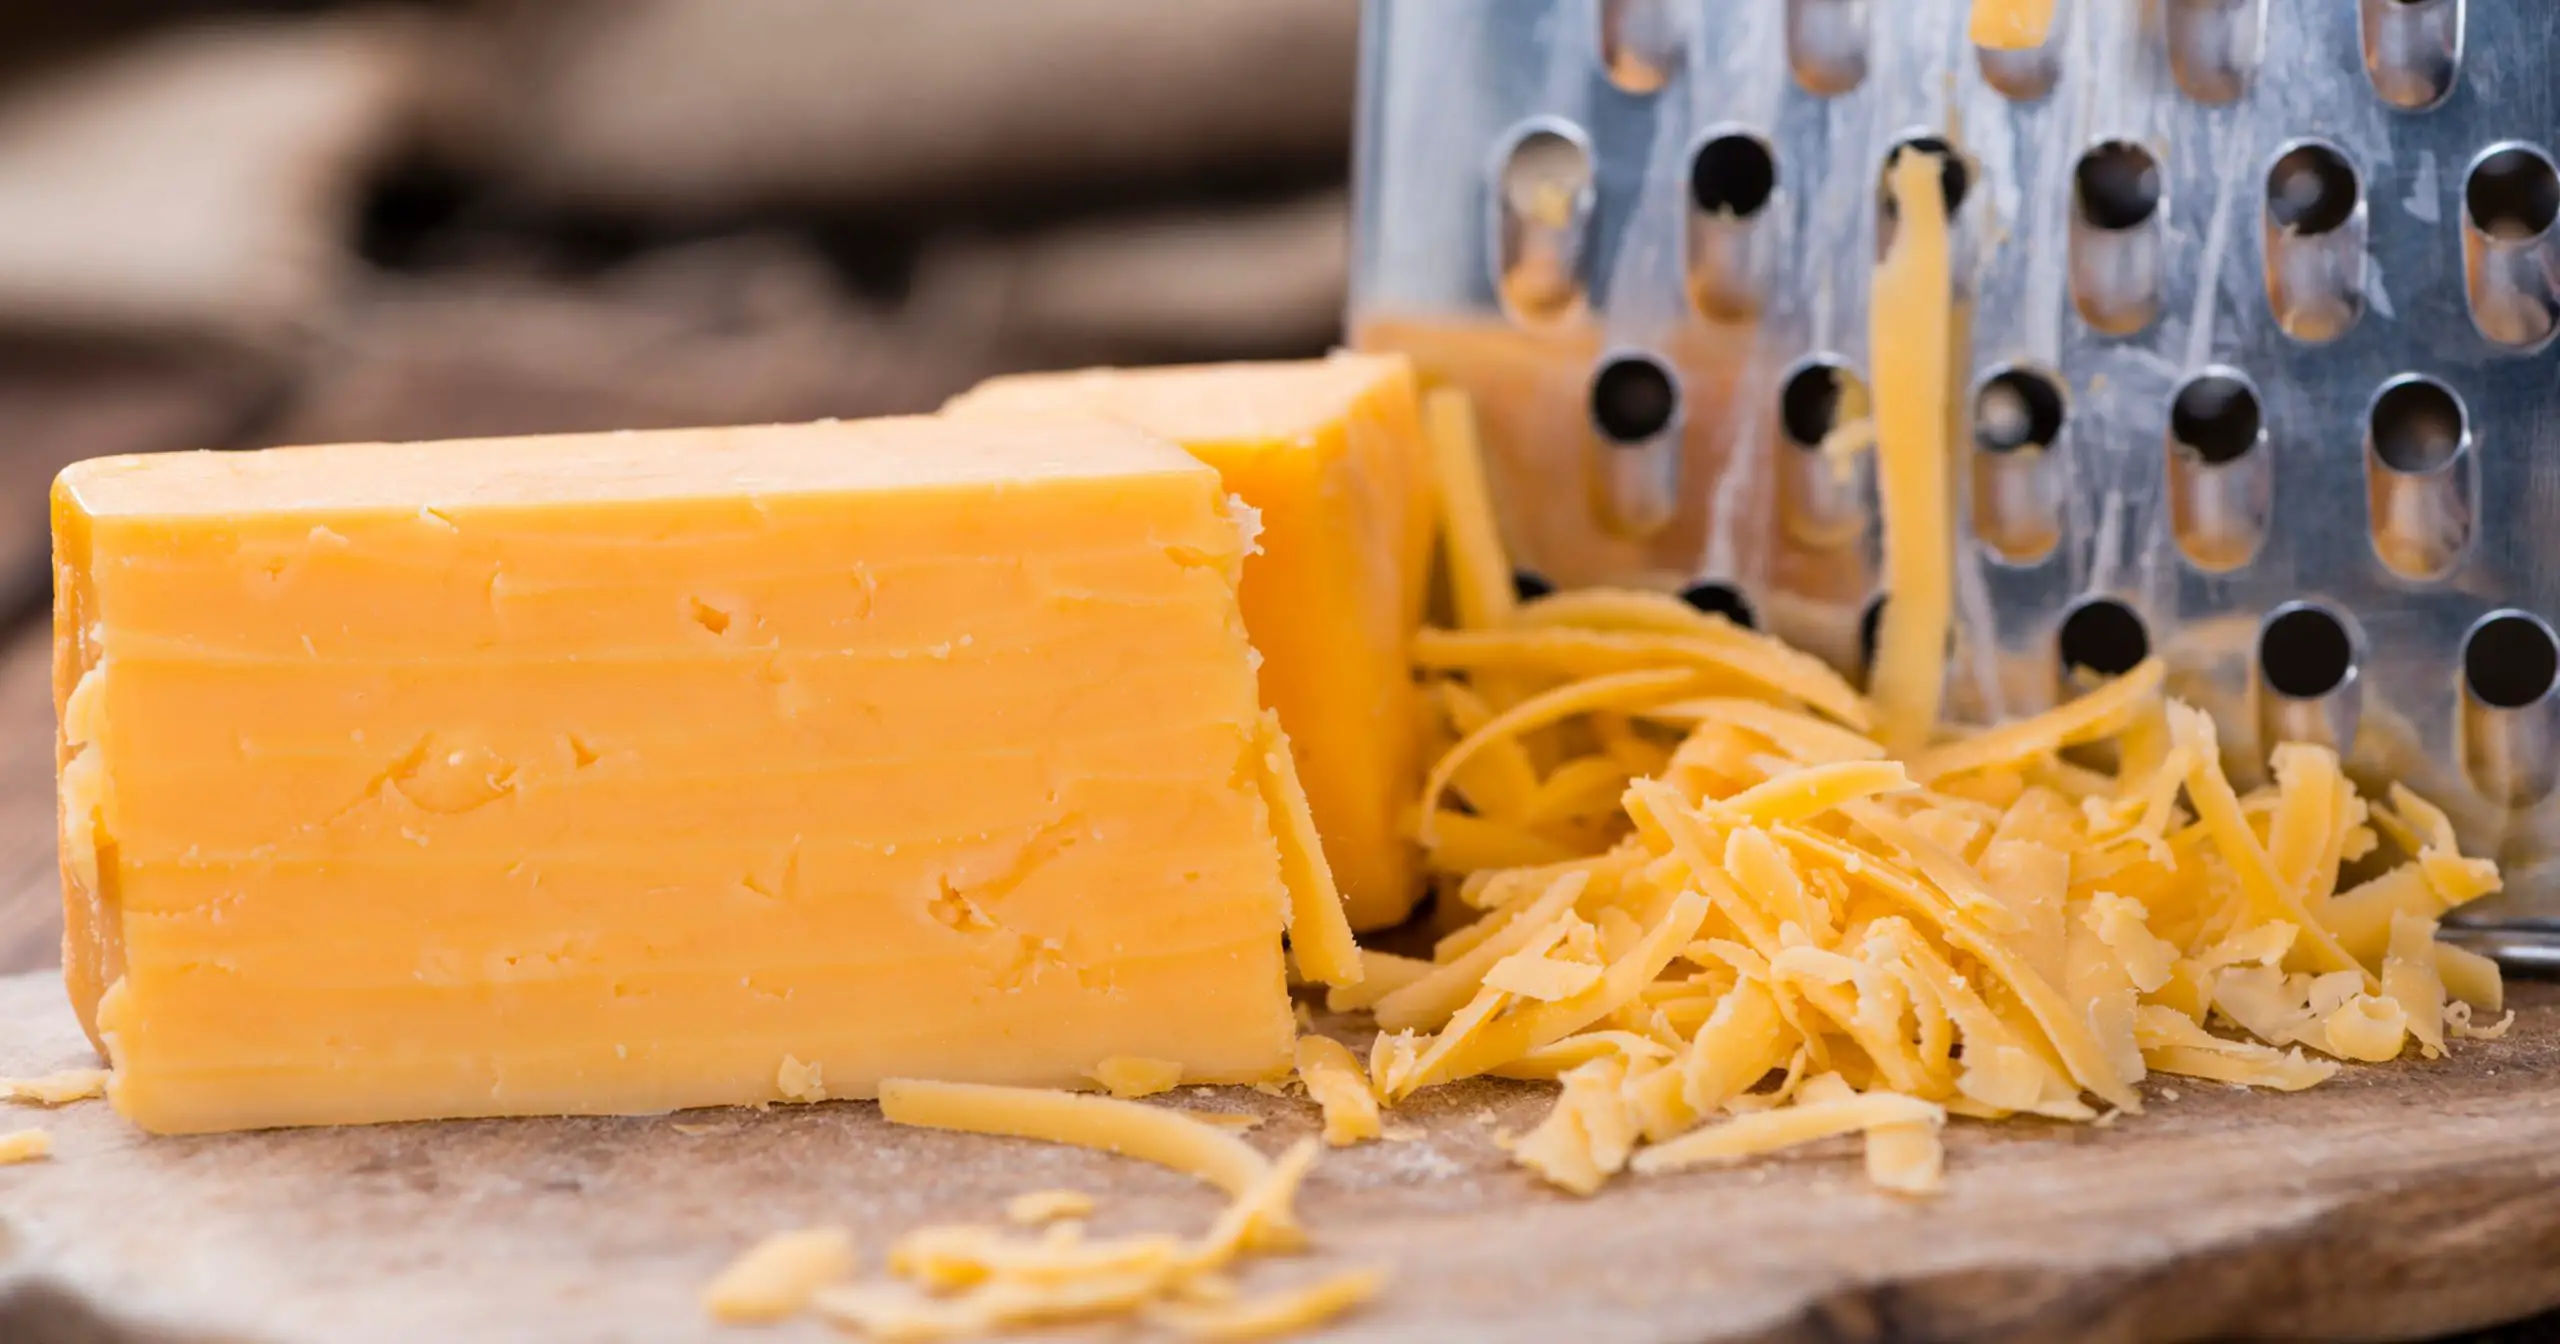 U.S. government to buy $20 million of glorious cheddar cheese